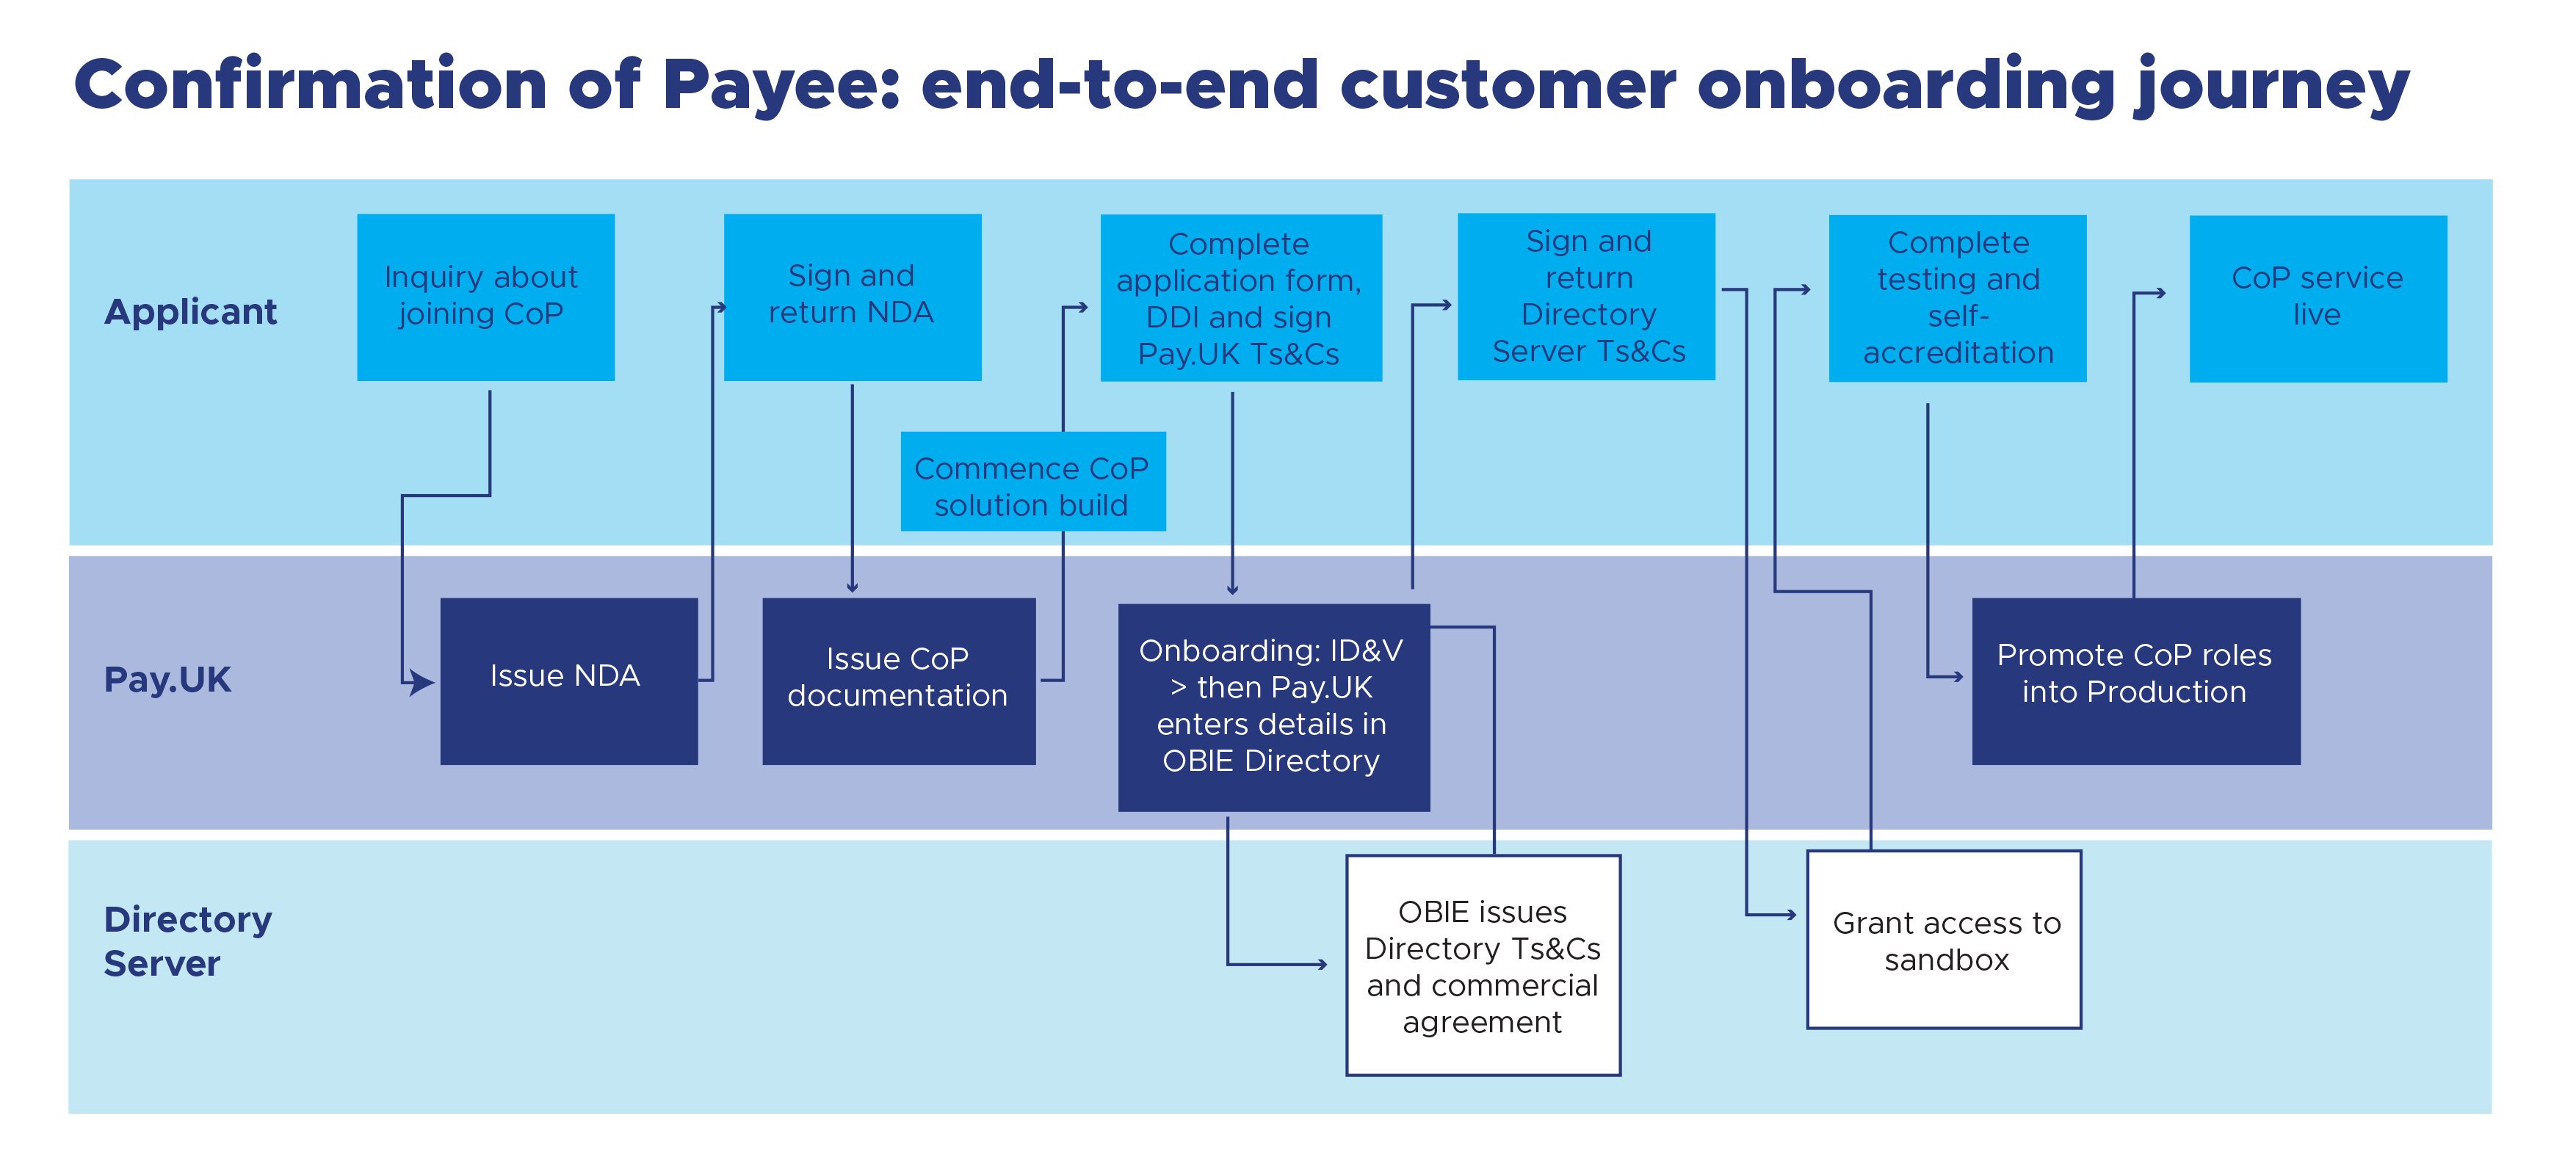 Confirmation of Payee (CoP) customer onboarding journey